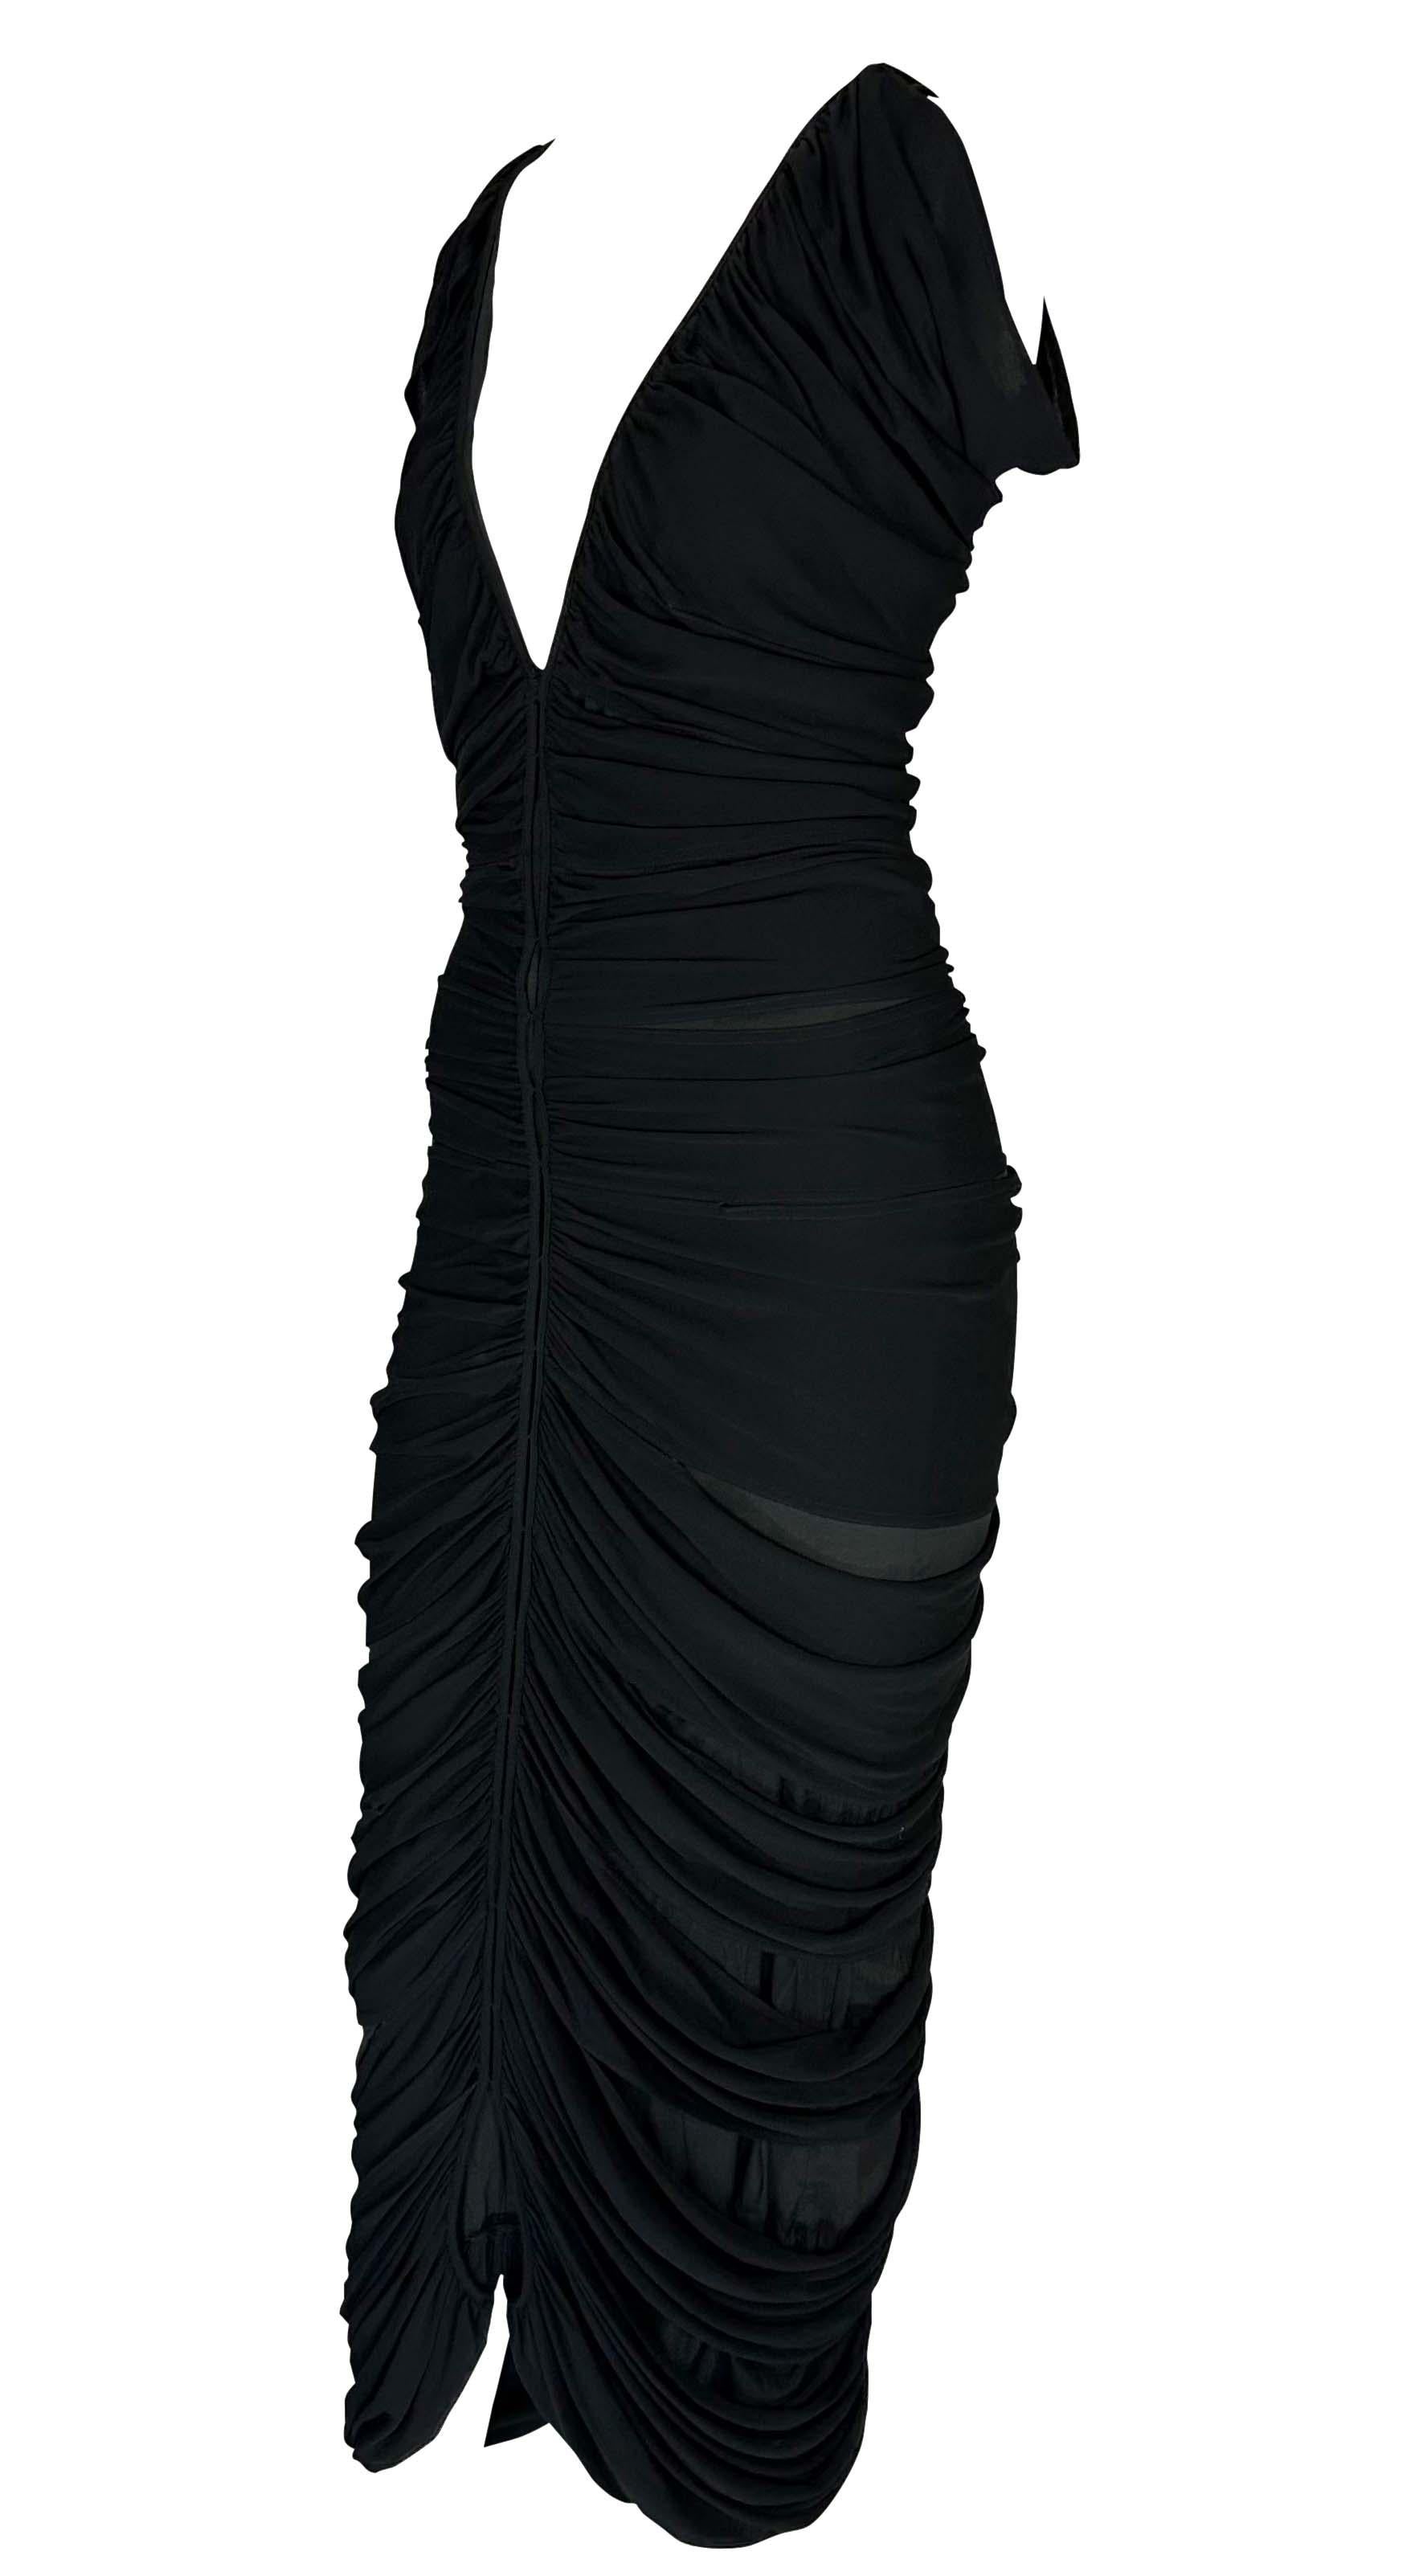 Presenting an incredible black Yves Saint Laurent Rive Gauche slinky dress, designed by Tom Ford. From the Spring/Summer 2001 collection, this fabulous dress is constructed of an interior slip and a masterfully designed ruched exterior. The dress